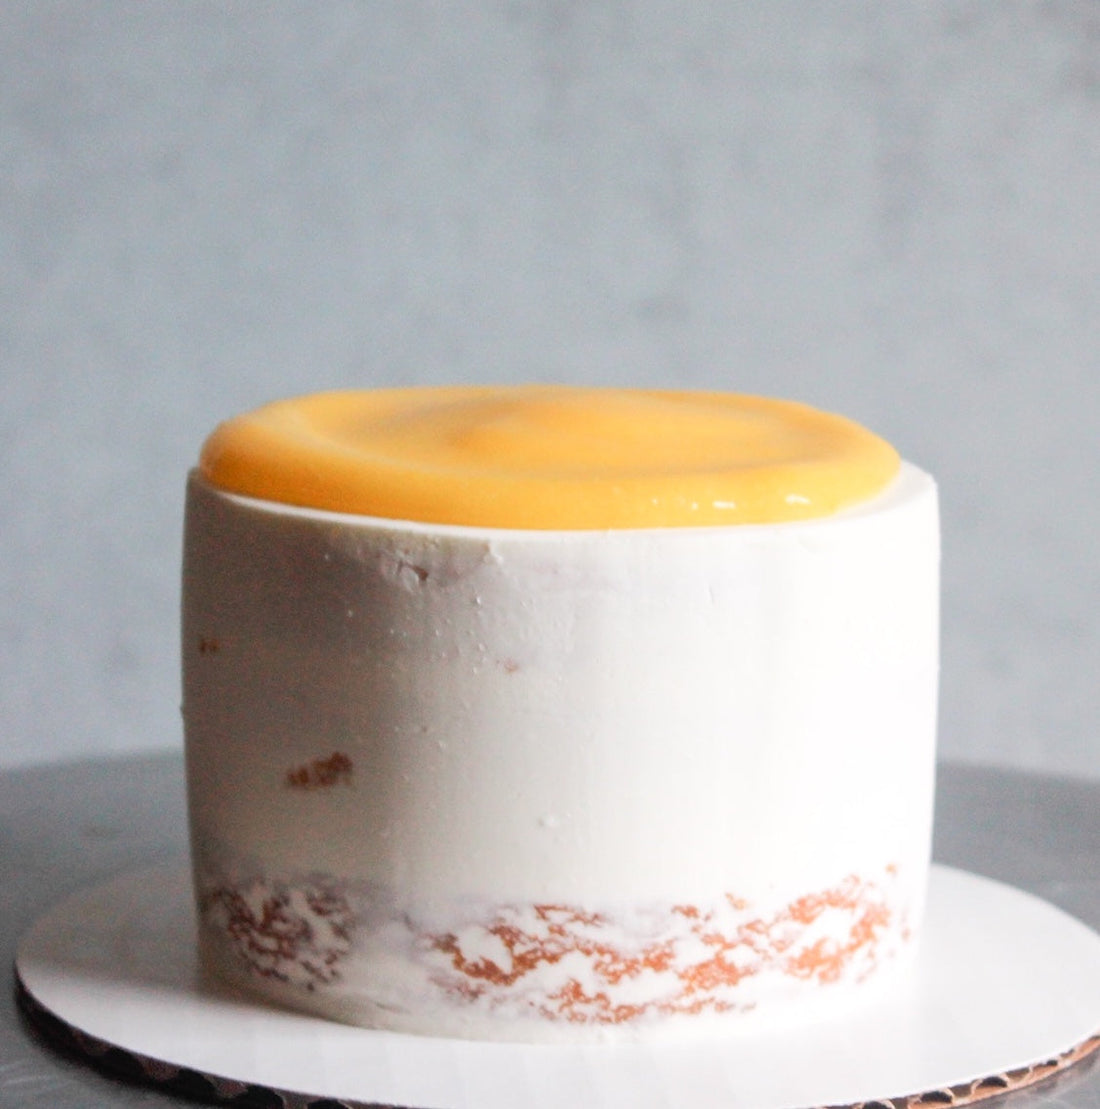 A round cake frosted in a sheer layer of white buttercream and topped with a pool of lemon curd.